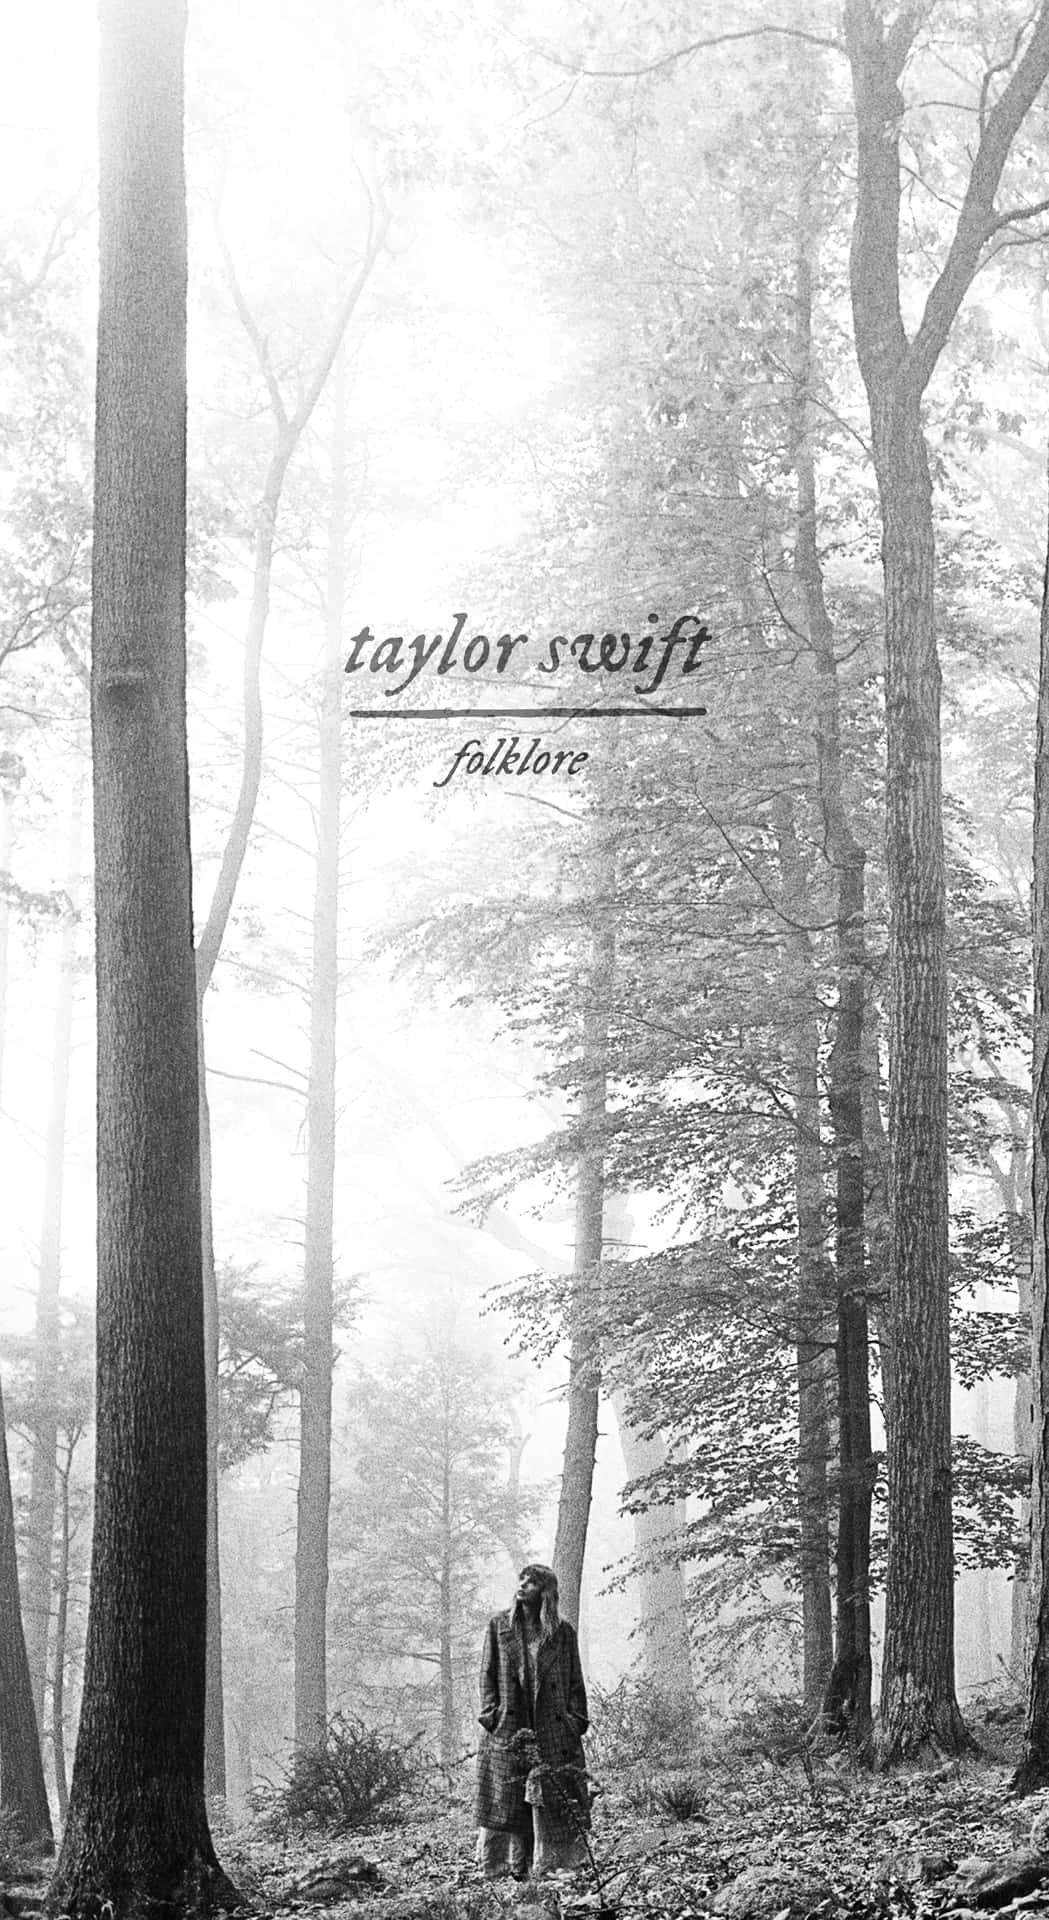 Taylor Swift looks out into the world with her new album "Folklore" Wallpaper